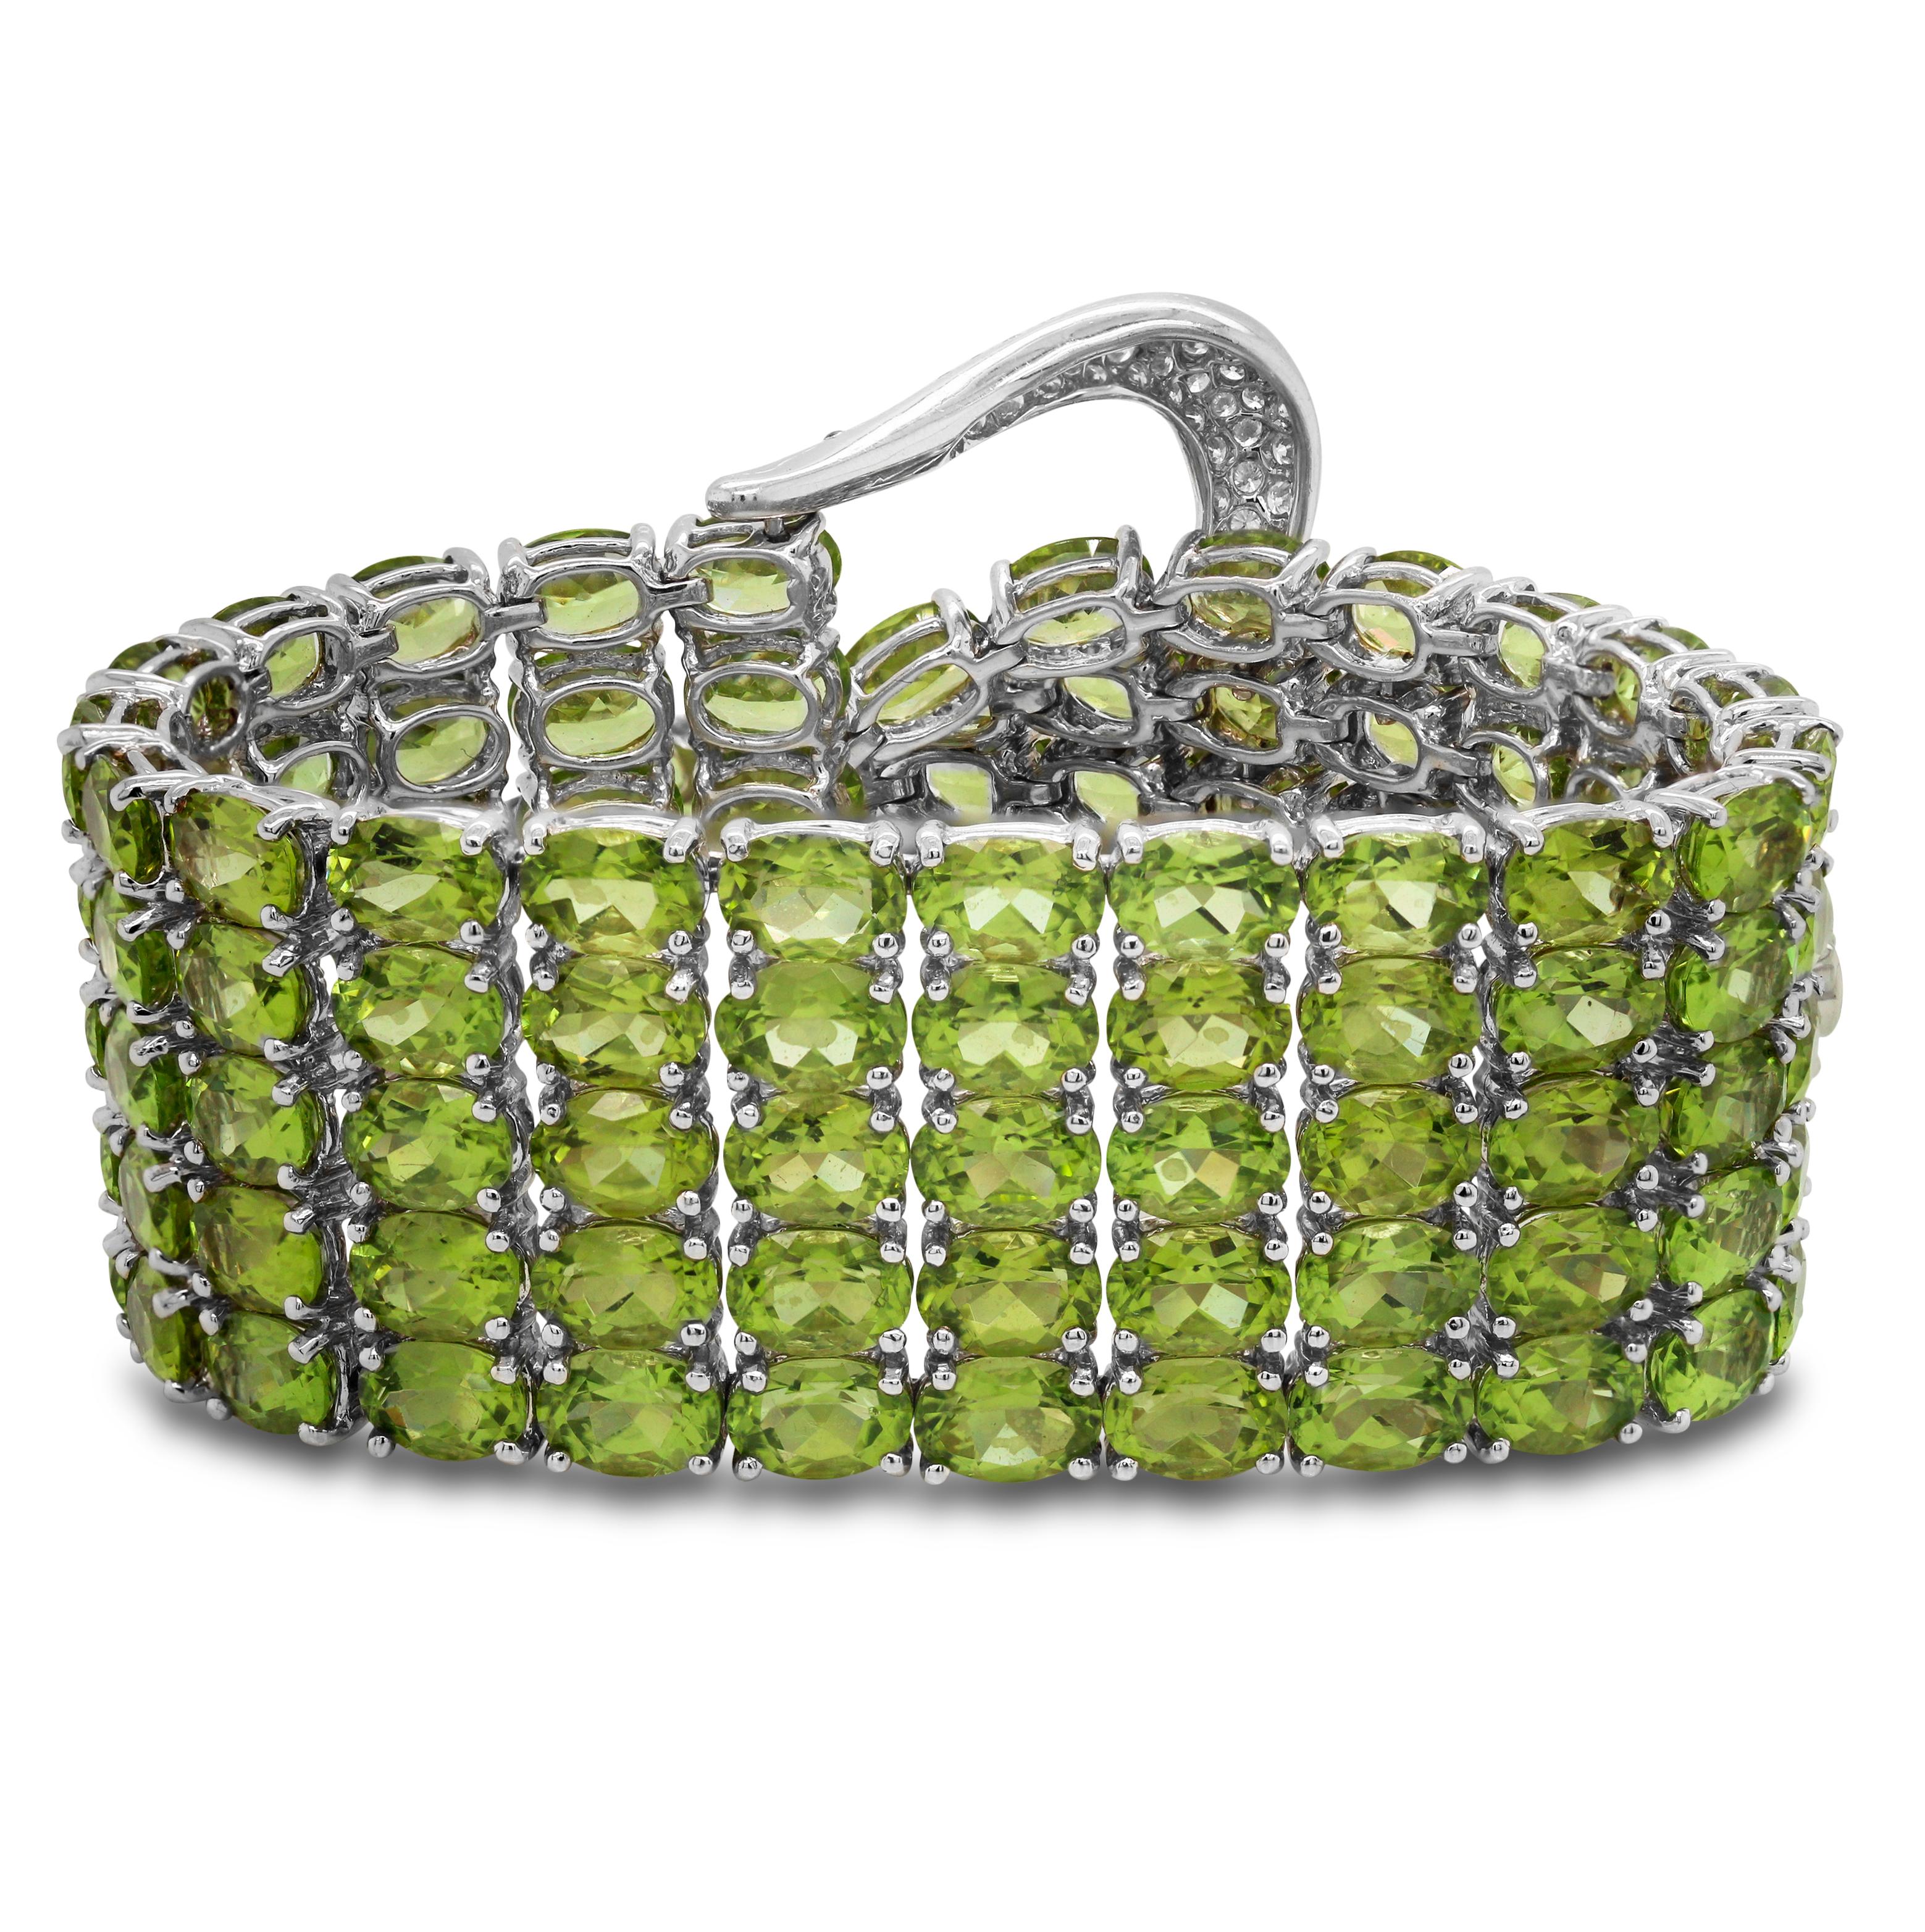 Oval Cut 125 Carat Peridot 18K White Gold and Diamonds Buckle Style Five Row Bracelet For Sale